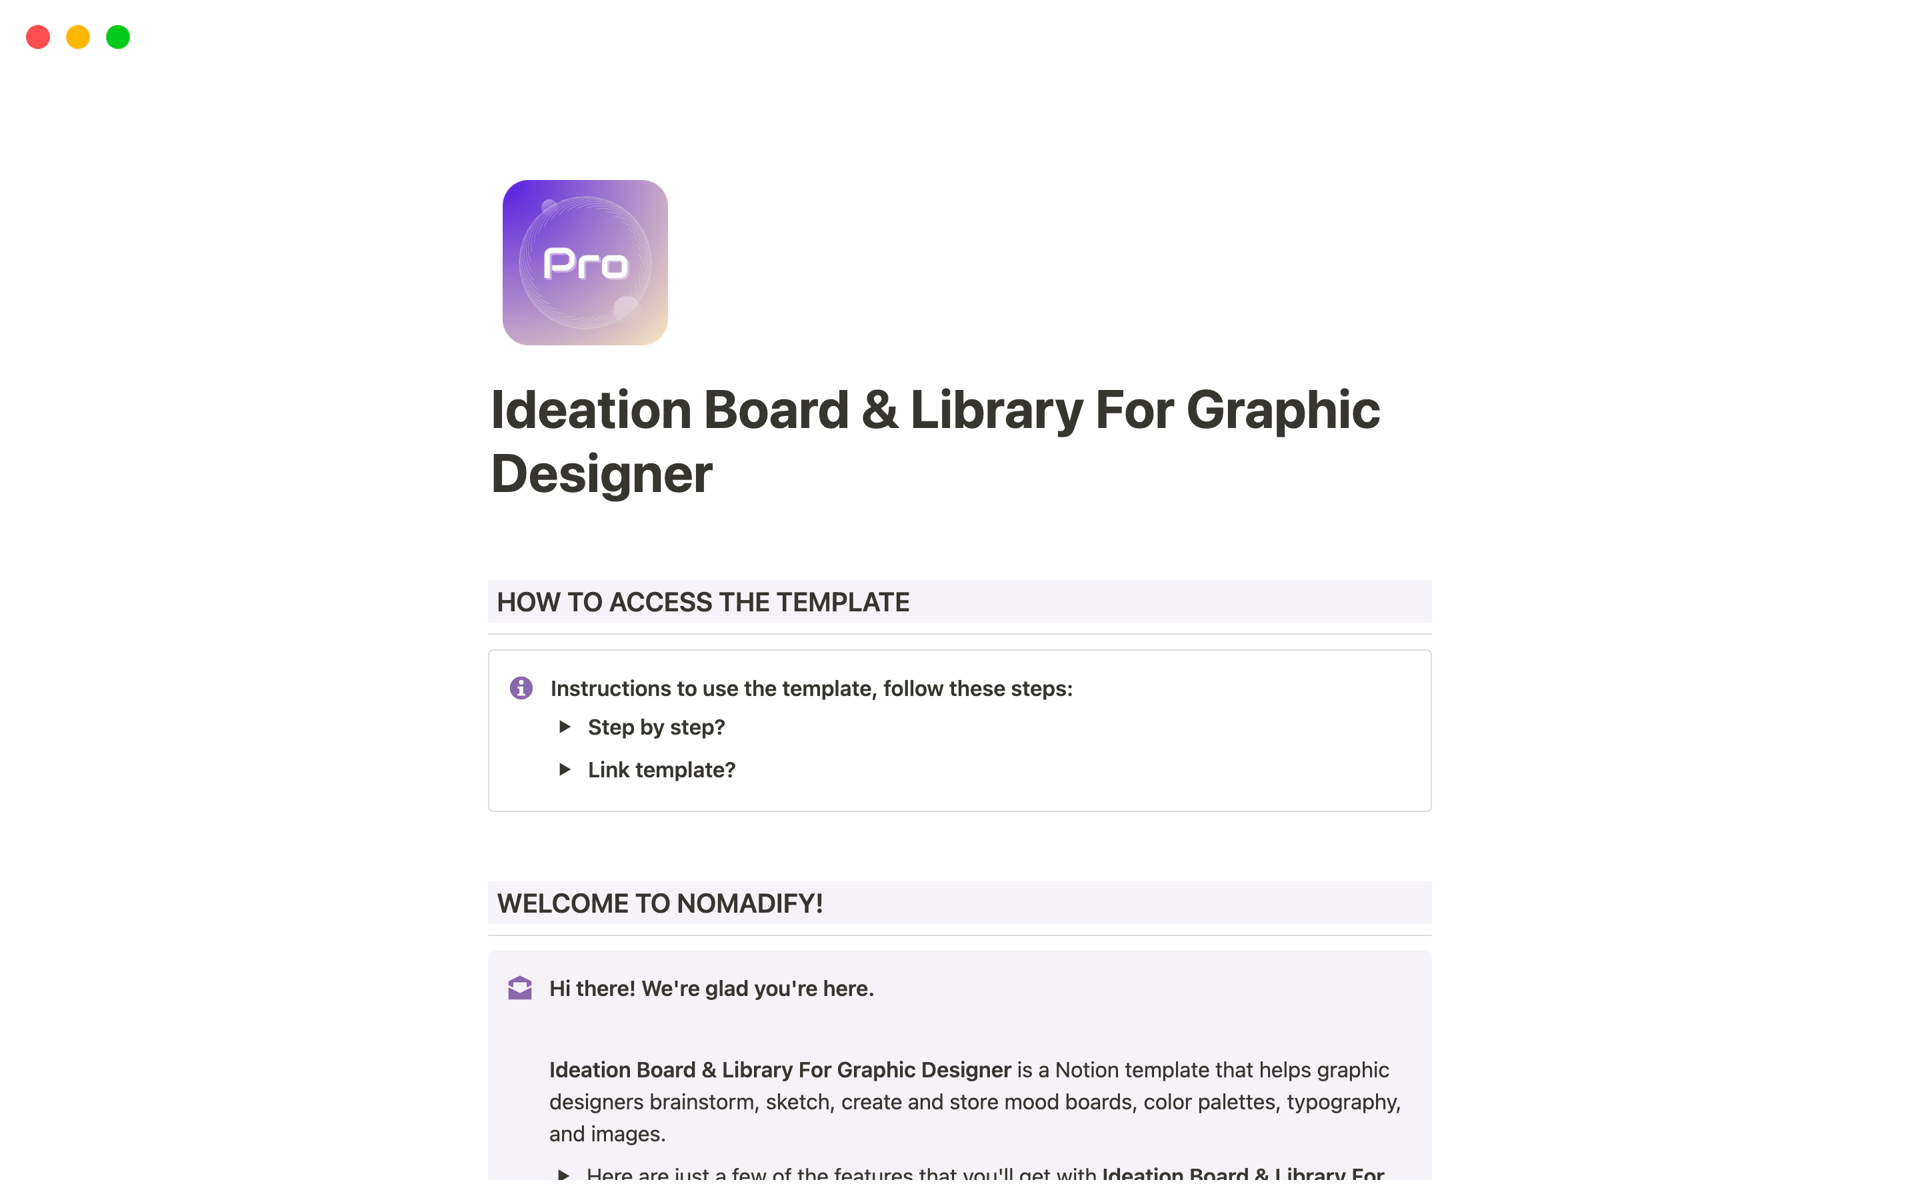 A template preview for Ideation Board & Library For Graphic Designer